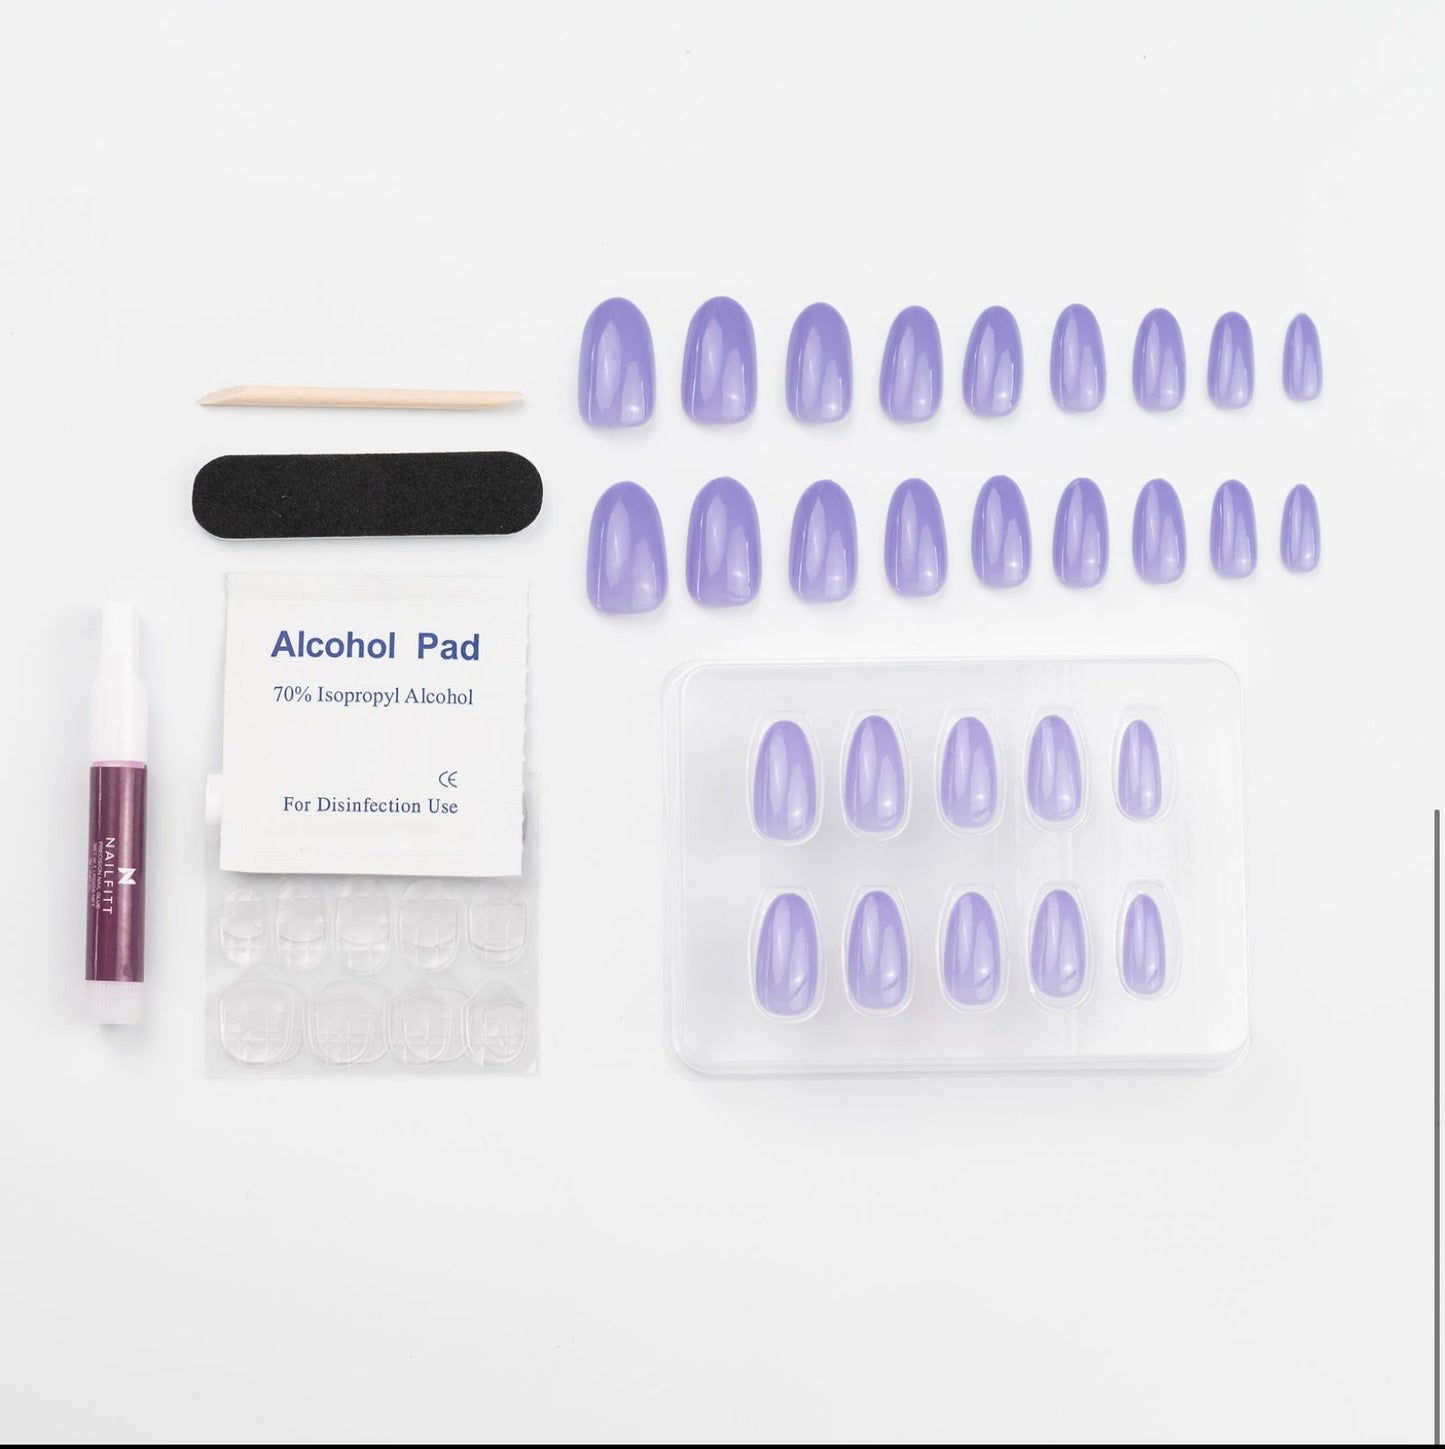 Lavender Haze Press-On Nails Mini Kits includes 24-26 nails, nail buffer, cuticle stick, nail glue and gel stickers